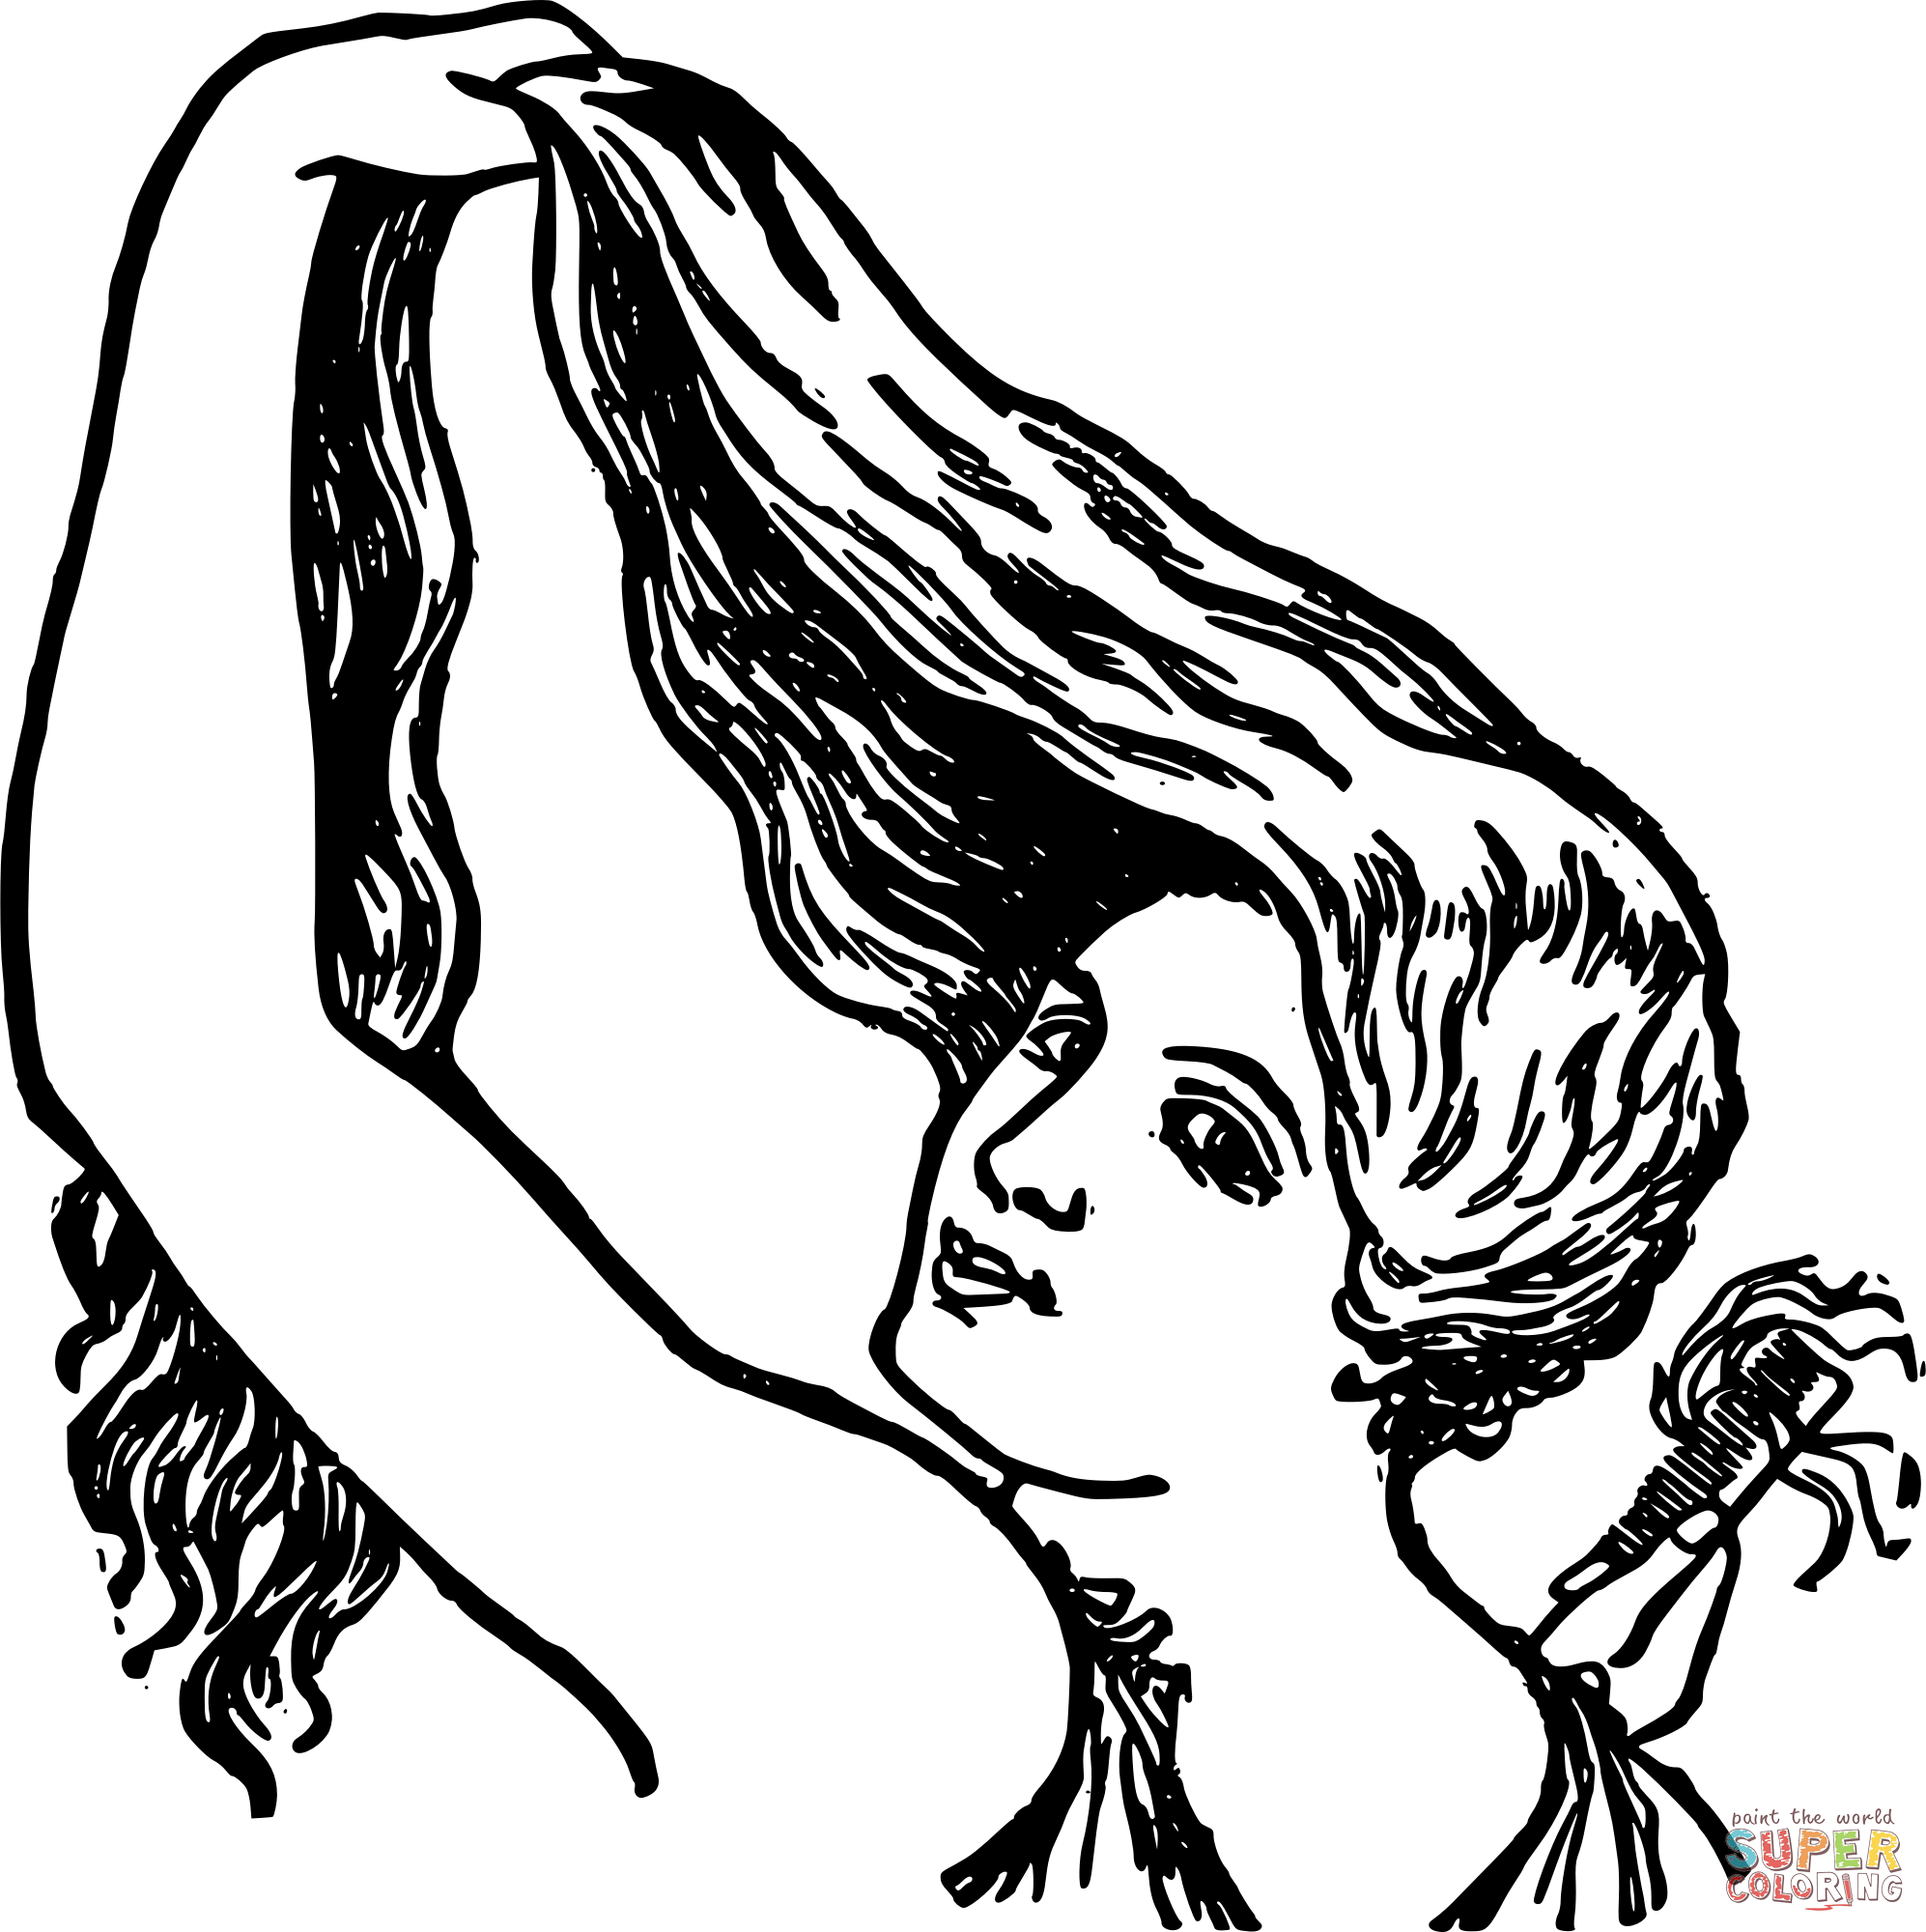 Vintage Lady Combs Hair coloring page | Free Printable Coloring Pages